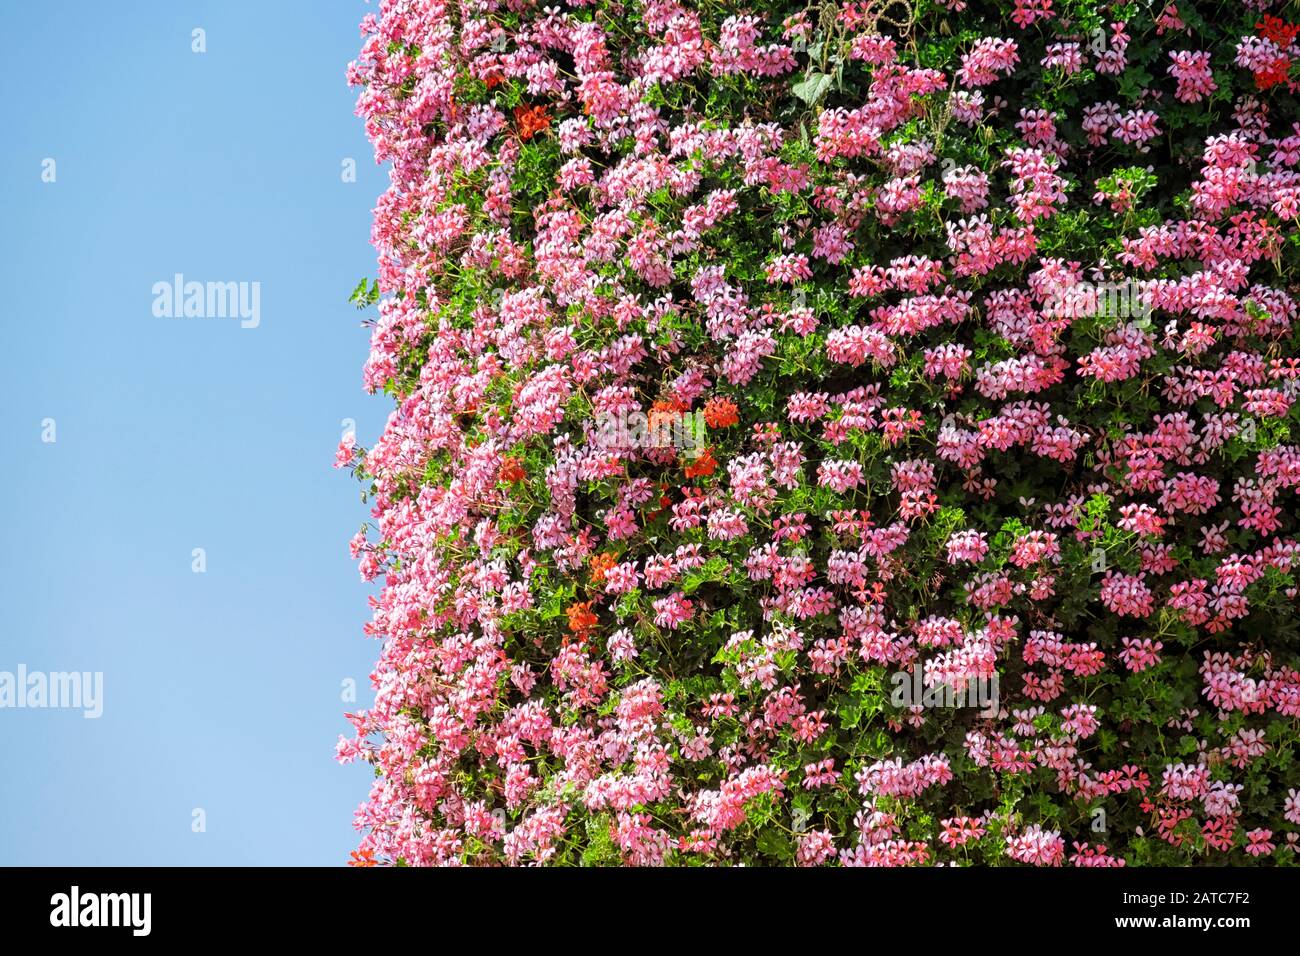 Blossoming beautiful flowers on a flat surface Stock Photo